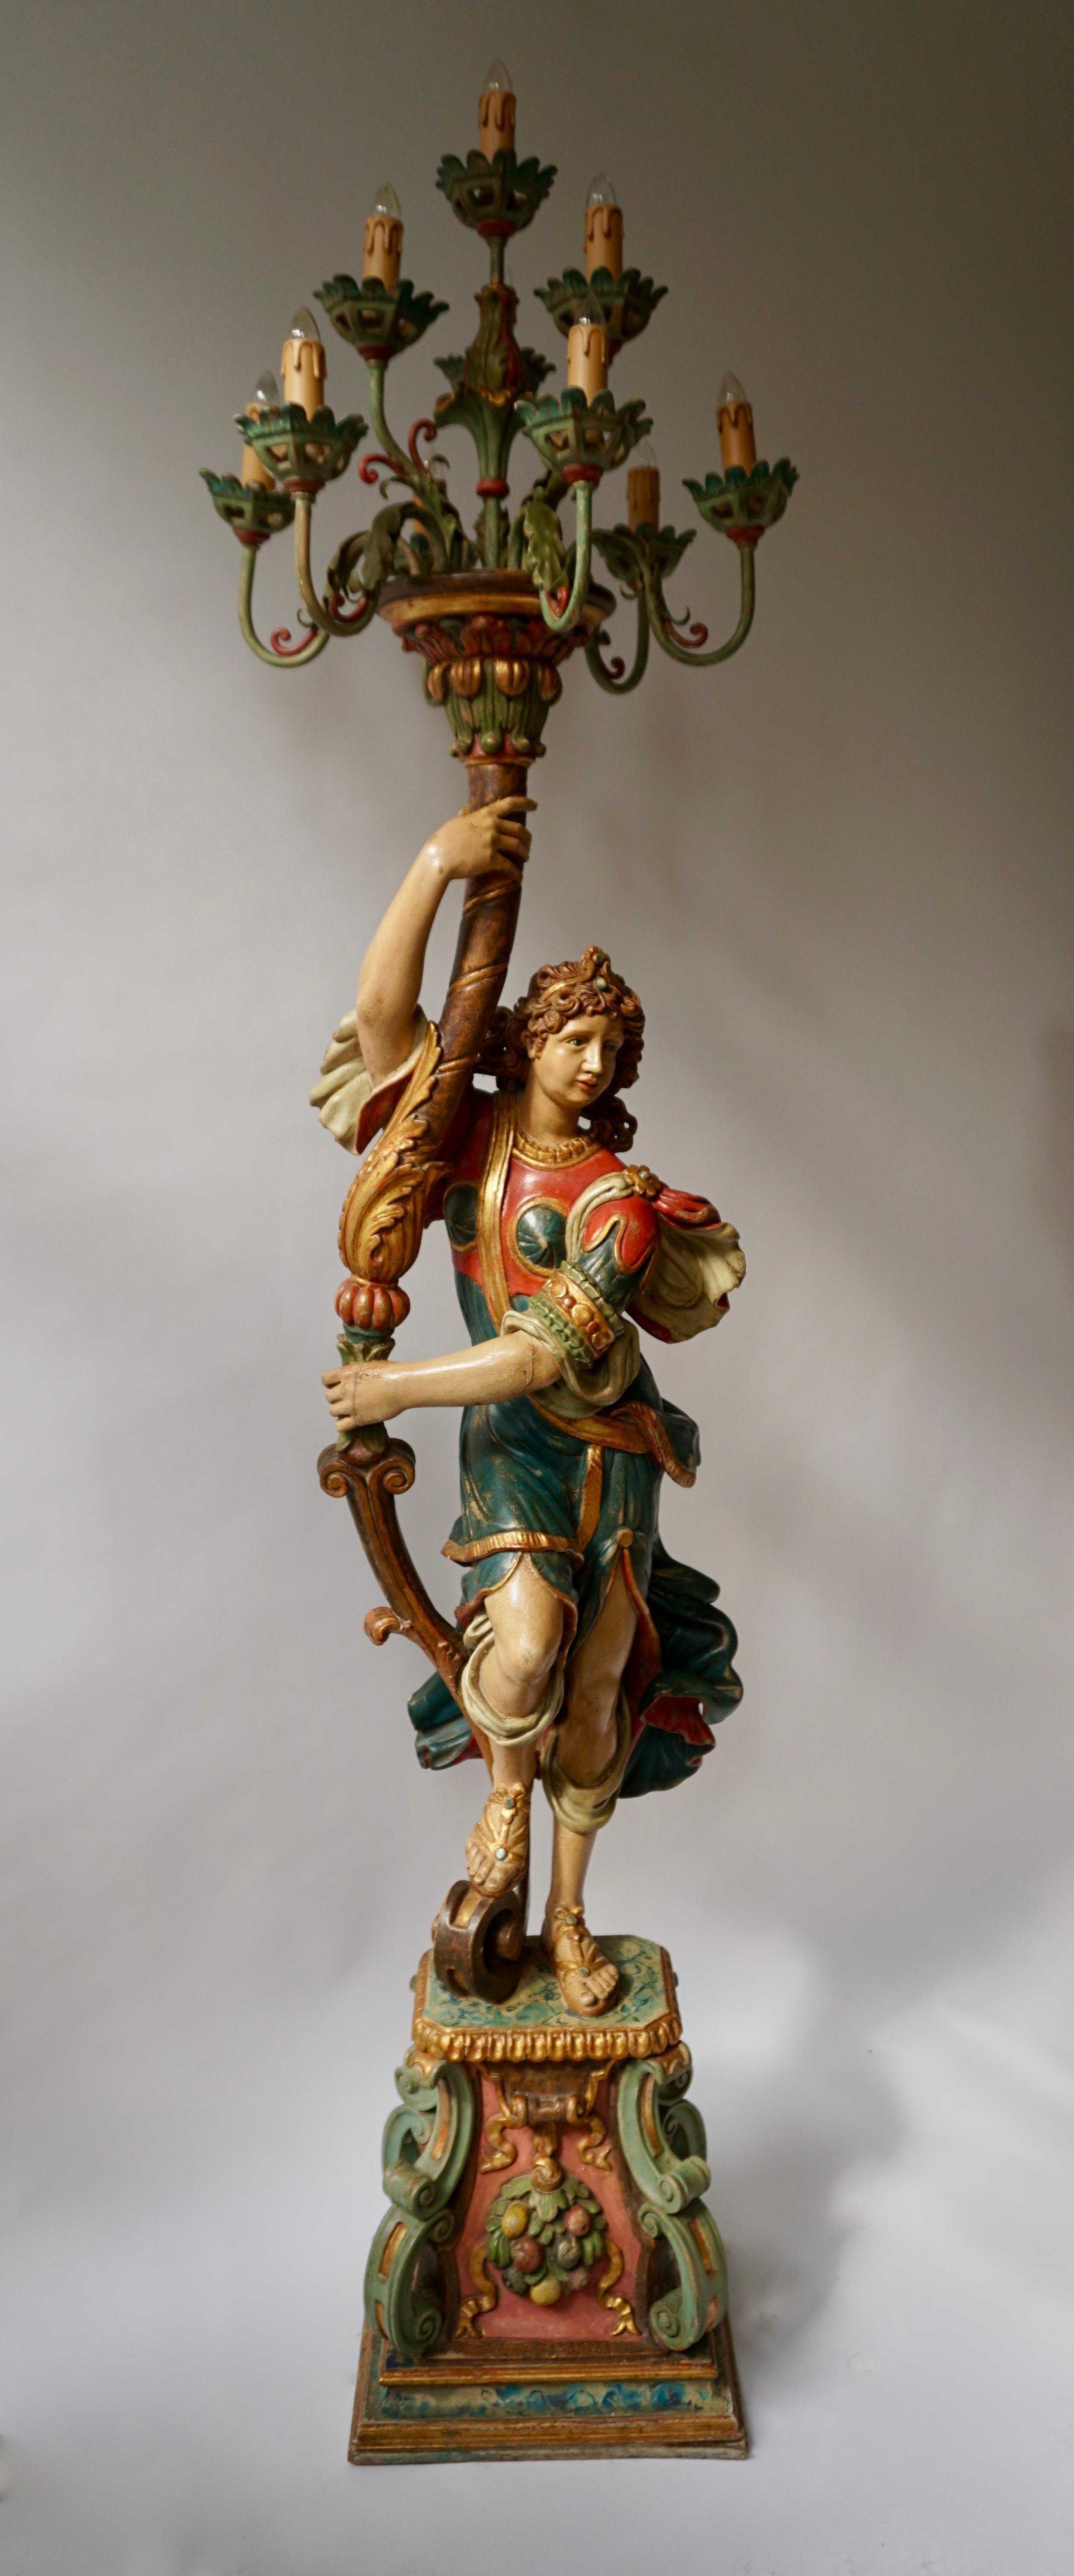 This is an exquisite decorative Venetian style candelabra floor lamp!

This rare and elegant Italian midcentury carved wood and polychrome painted figure is holding a ten-arm candelabra. Each arm of color tole candelabra is decorated with foliage